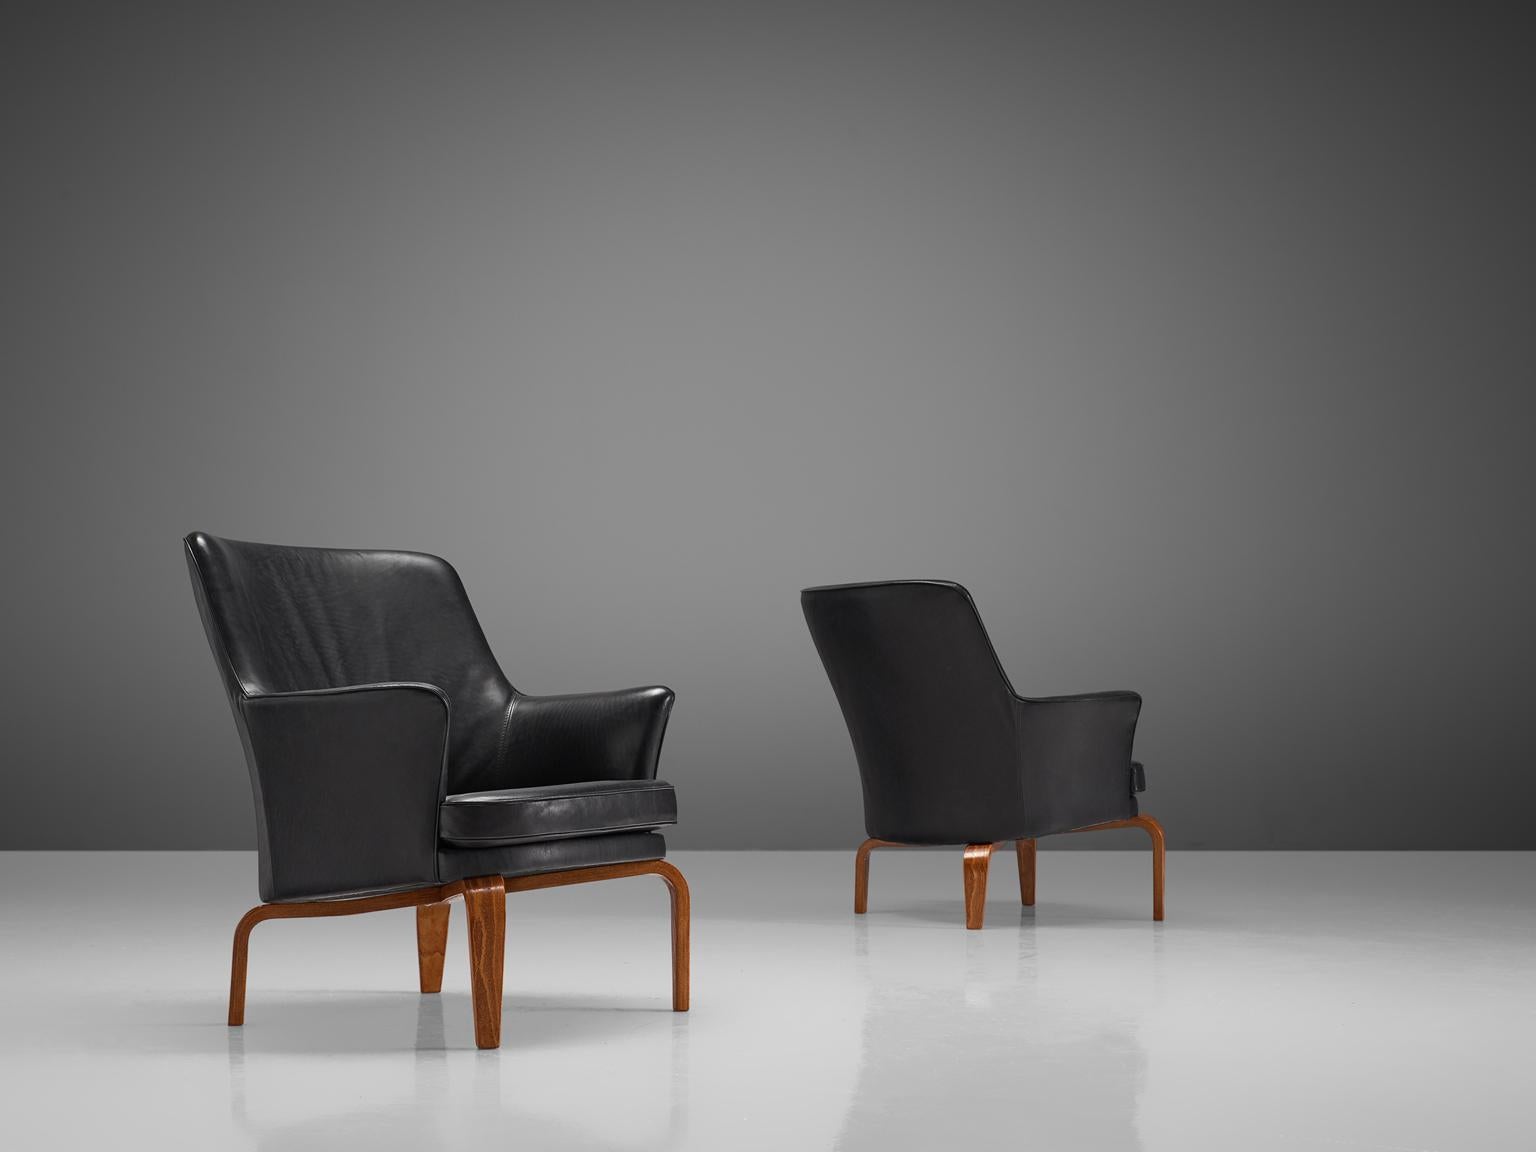 Arne Norell for Norell mobilier, 'Pilot T184' armchairs with leather and stained beech, Sweden, 1970s. 

This set of high back chairs are slightly curved and have a high headrest. They are upholstered entirely with very high quality aniline black